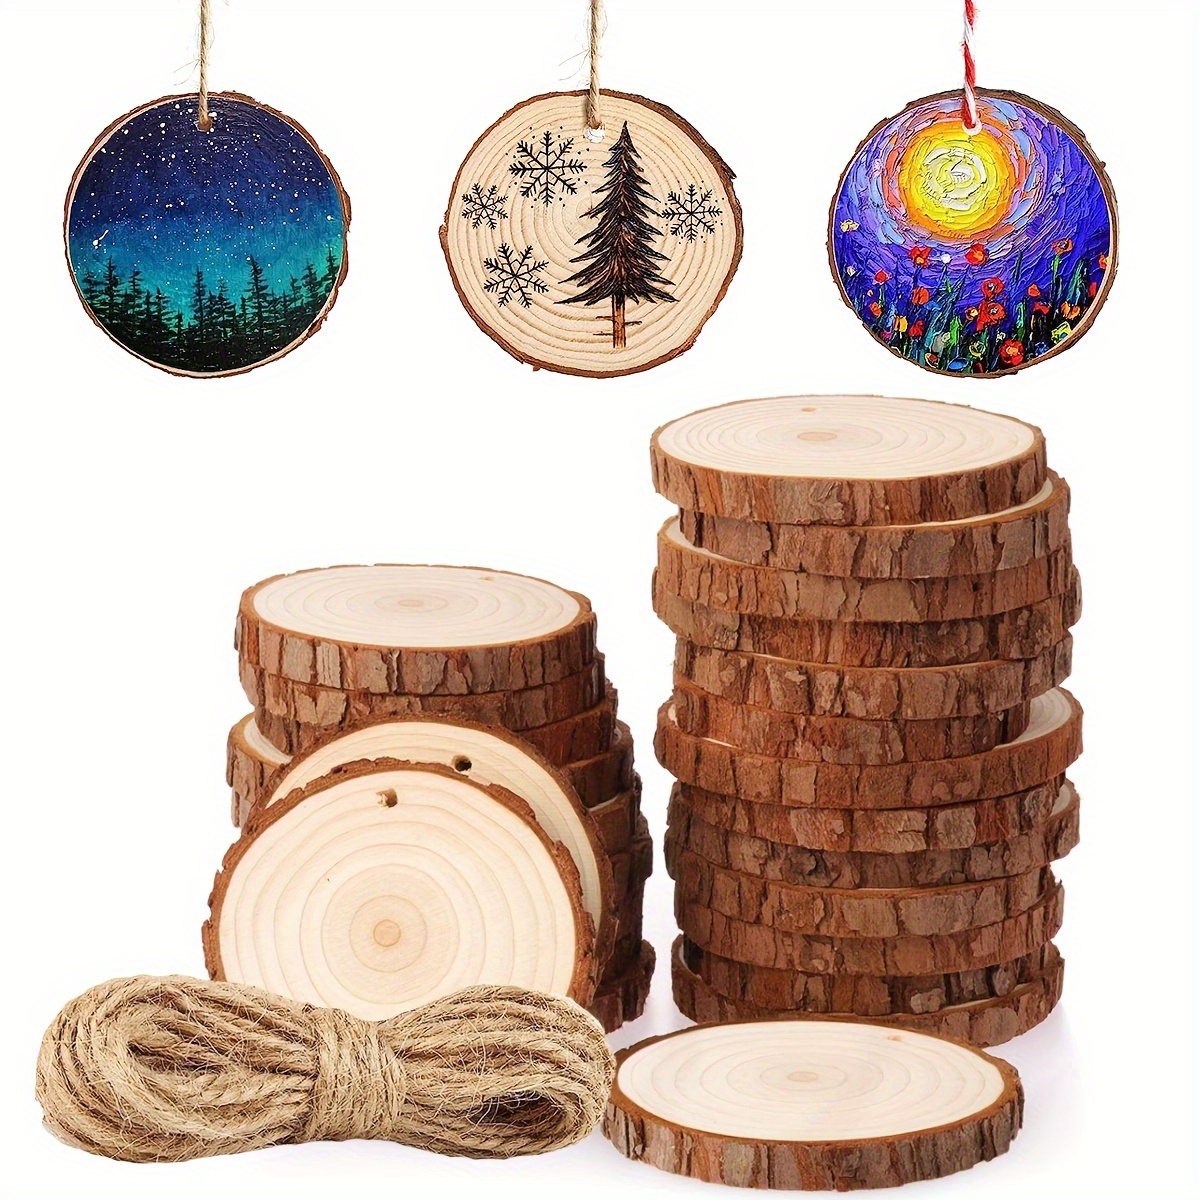 3 Pcs 10-12 Inch Wood Slices for Centerpieces, Wood Rounds for Wedding  Centerpiece, DIY Projects, Painting, Etc 